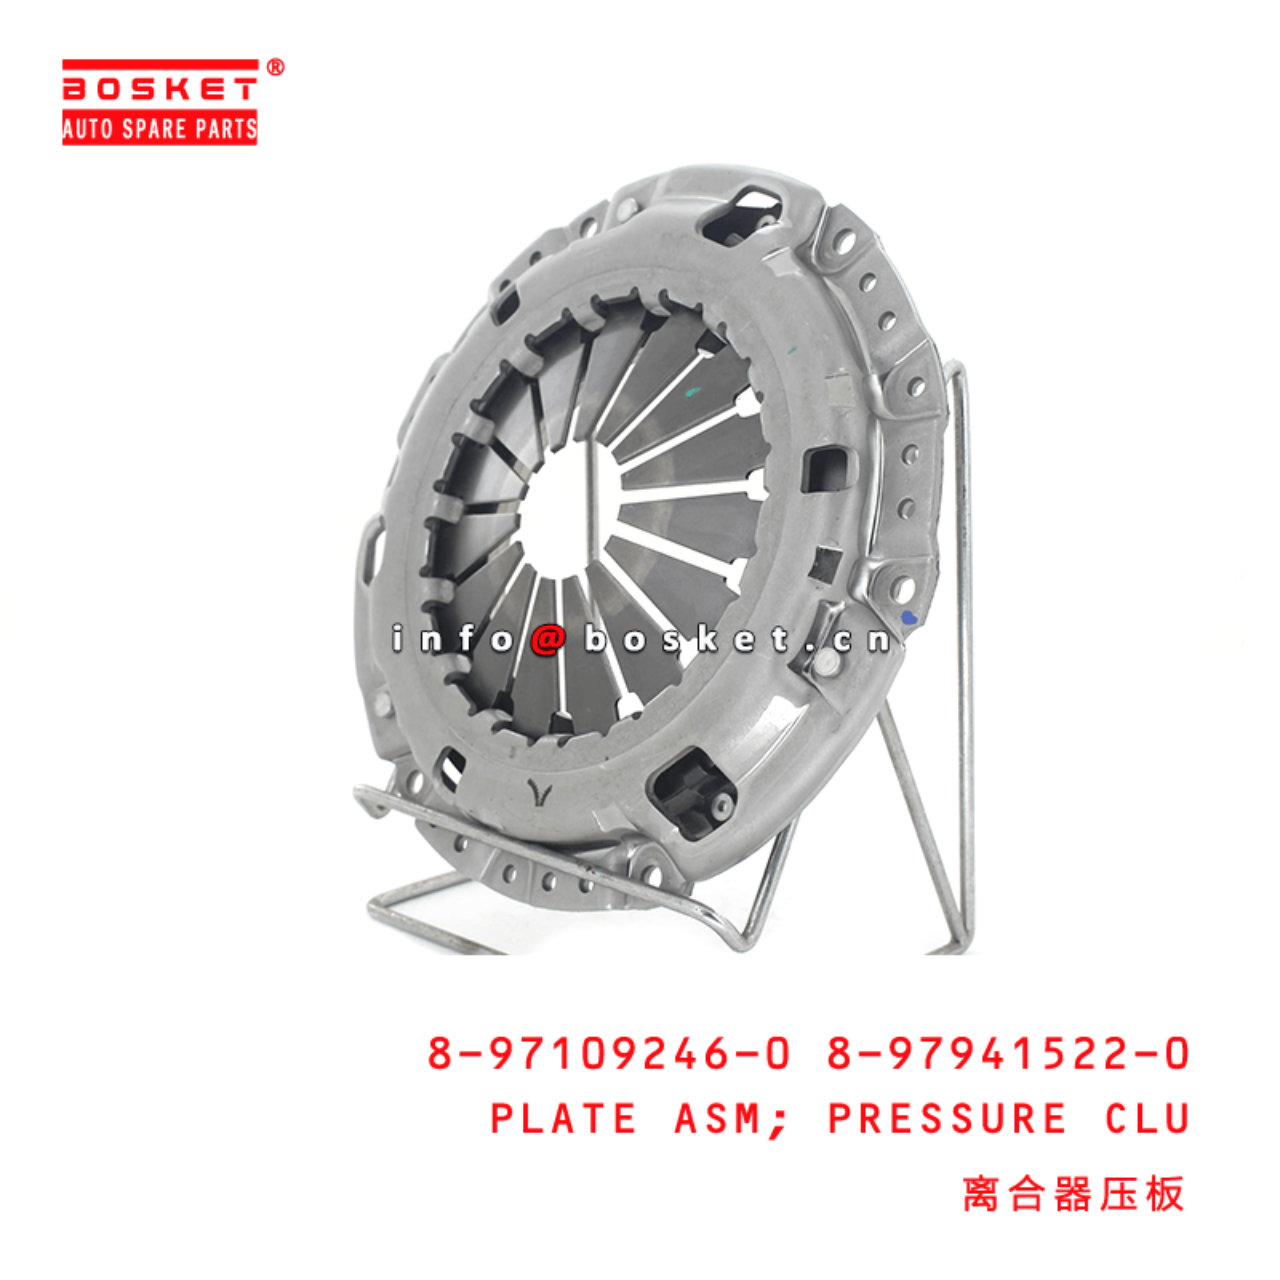 8-97109246-0 8-97941522-0 Pressure Clutch Plate Assembly 8971092460 8979415220 Suitable for ISUZU NK